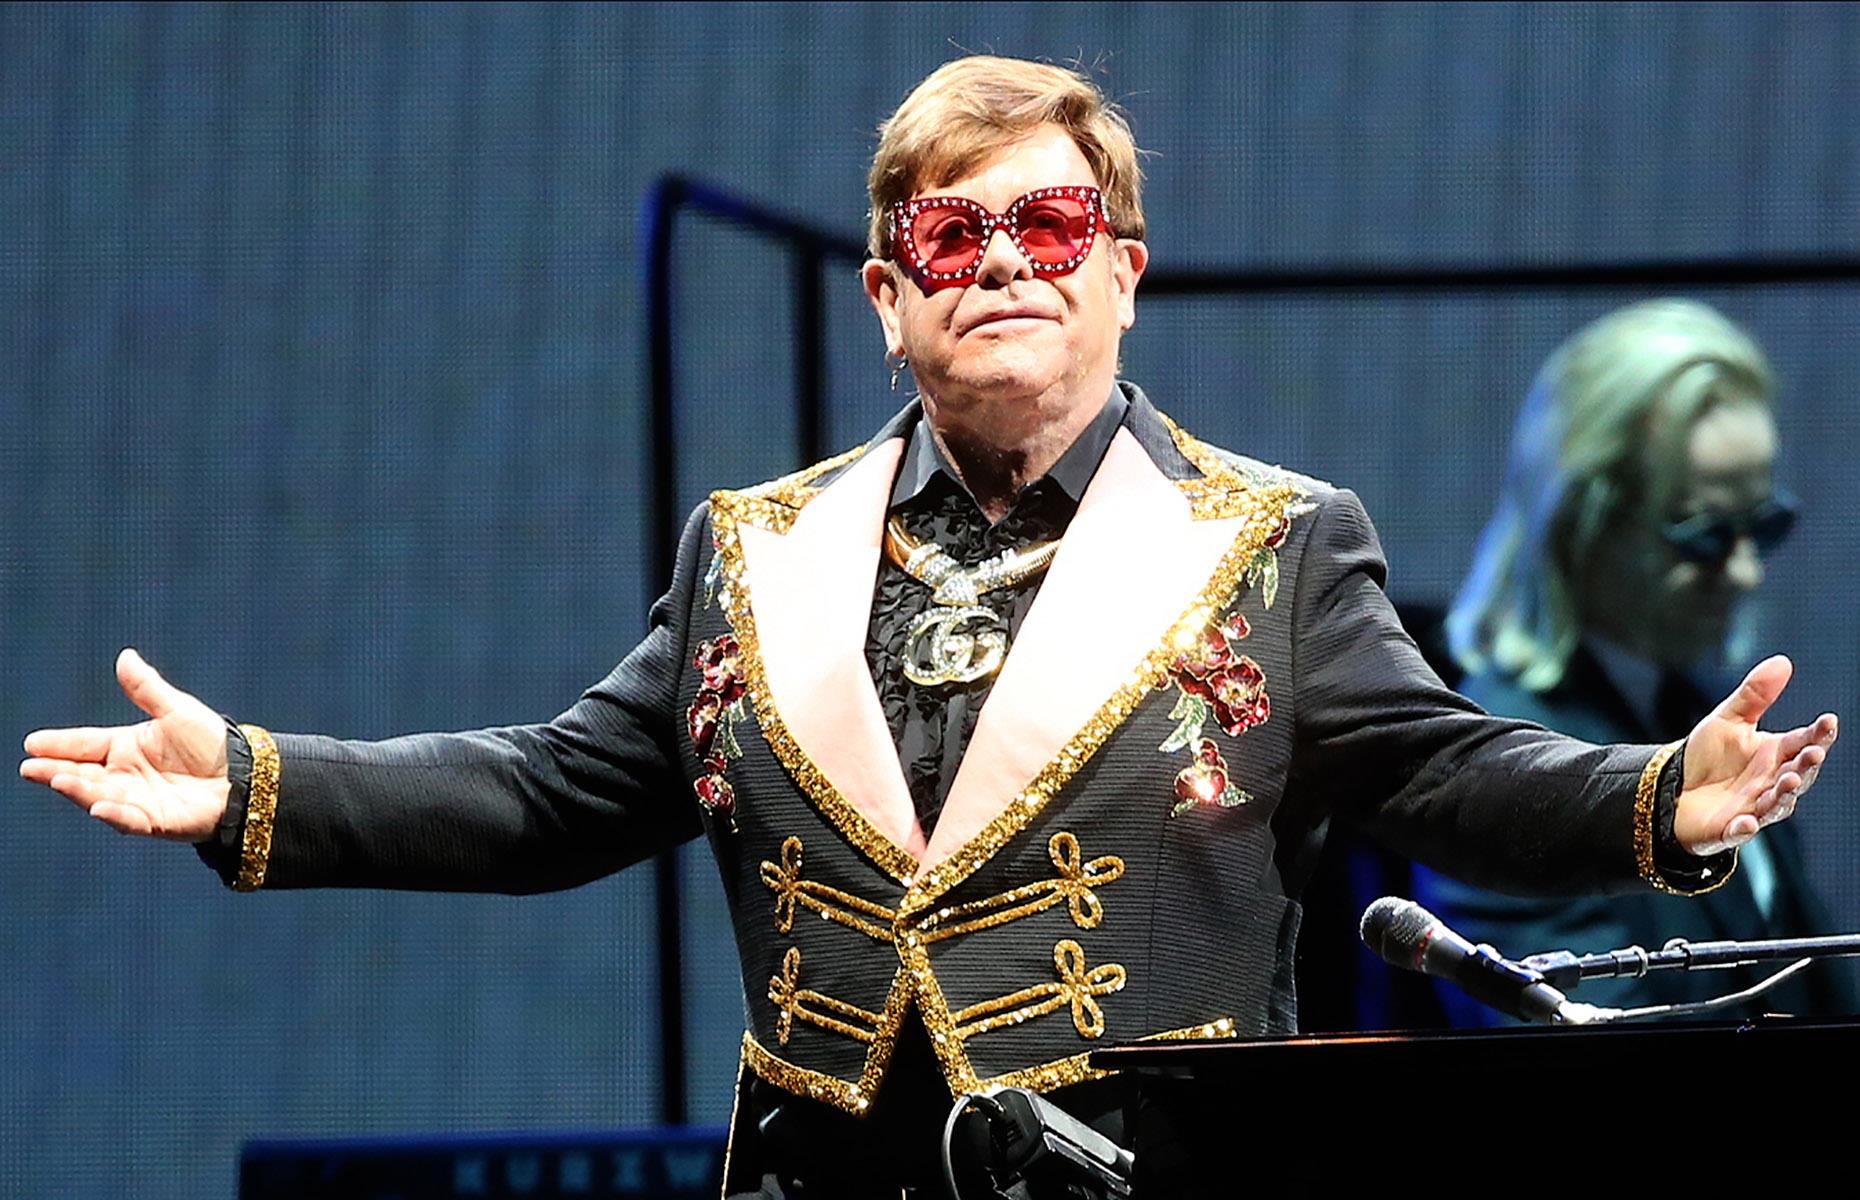 <p>Elton John's epic <em>Farewell Yellow Brick Road Tour</em>, which began in September 2018 and wrapped up in July 2023, marked the legendary British singer-songwriter's final global trek before retiring from life on the road. The veteran superstar played a staggering 330 shows across Oceania, Europe, and North America, attended by a grand total of 6.1 million adoring fans.</p>  <p>Unsurprisingly, this epic swan song grossed an astronomical $939.1 million, which equates to $980 million in 2024 money. These jaw-dropping figures confirm Elton John's <em>Farewell Yellow Brick Road Tour </em>as the second-highest-grossing tour by a solo artist of all time.</p>  <p>However, one solo star has managed to dethrone Sir Elton and claim the top spot (no prizes for guessing who).</p>